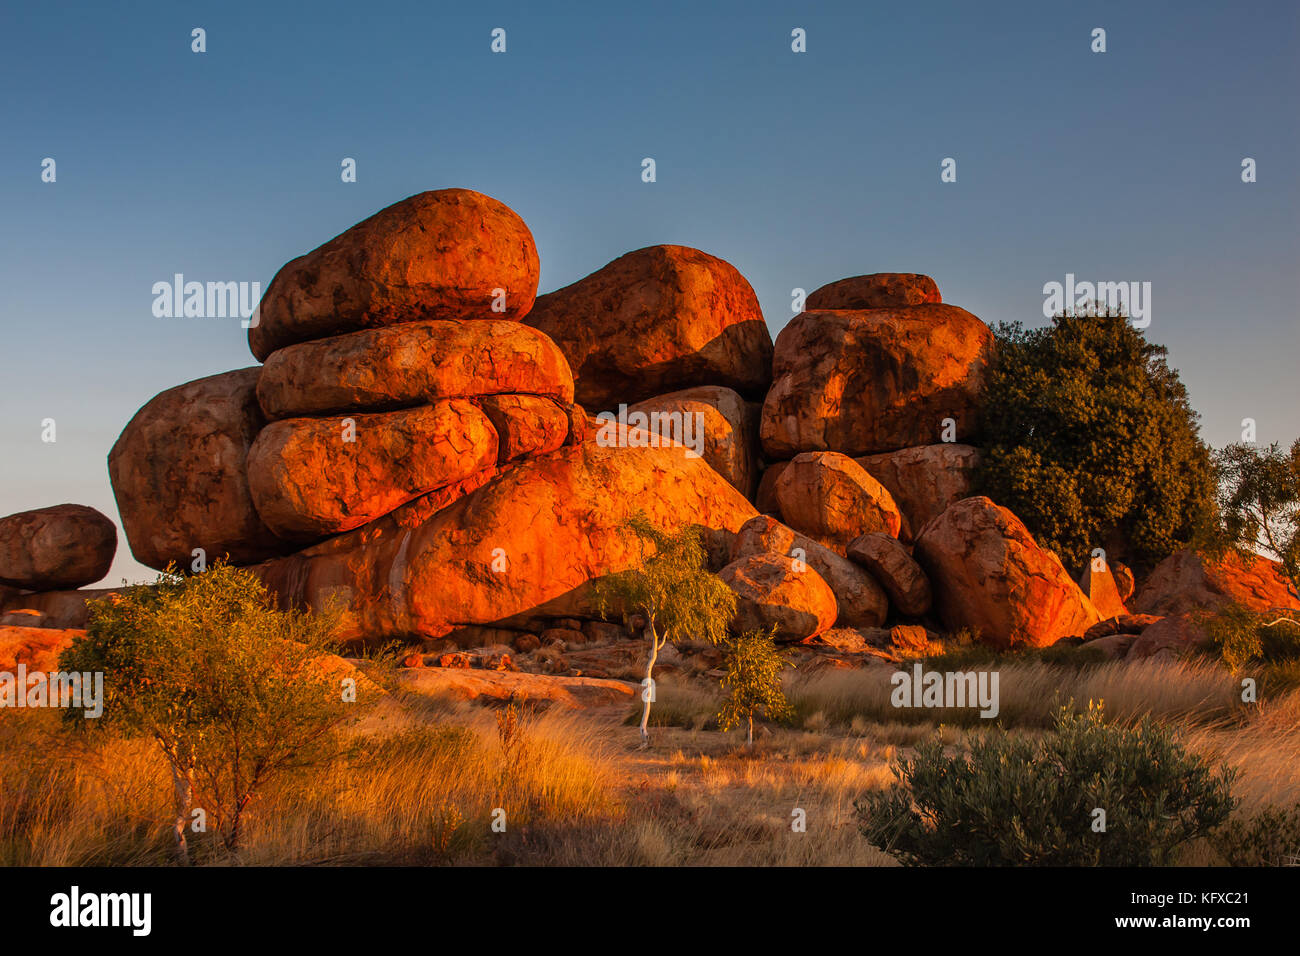 Devils Marbles at sunset Stock Photo